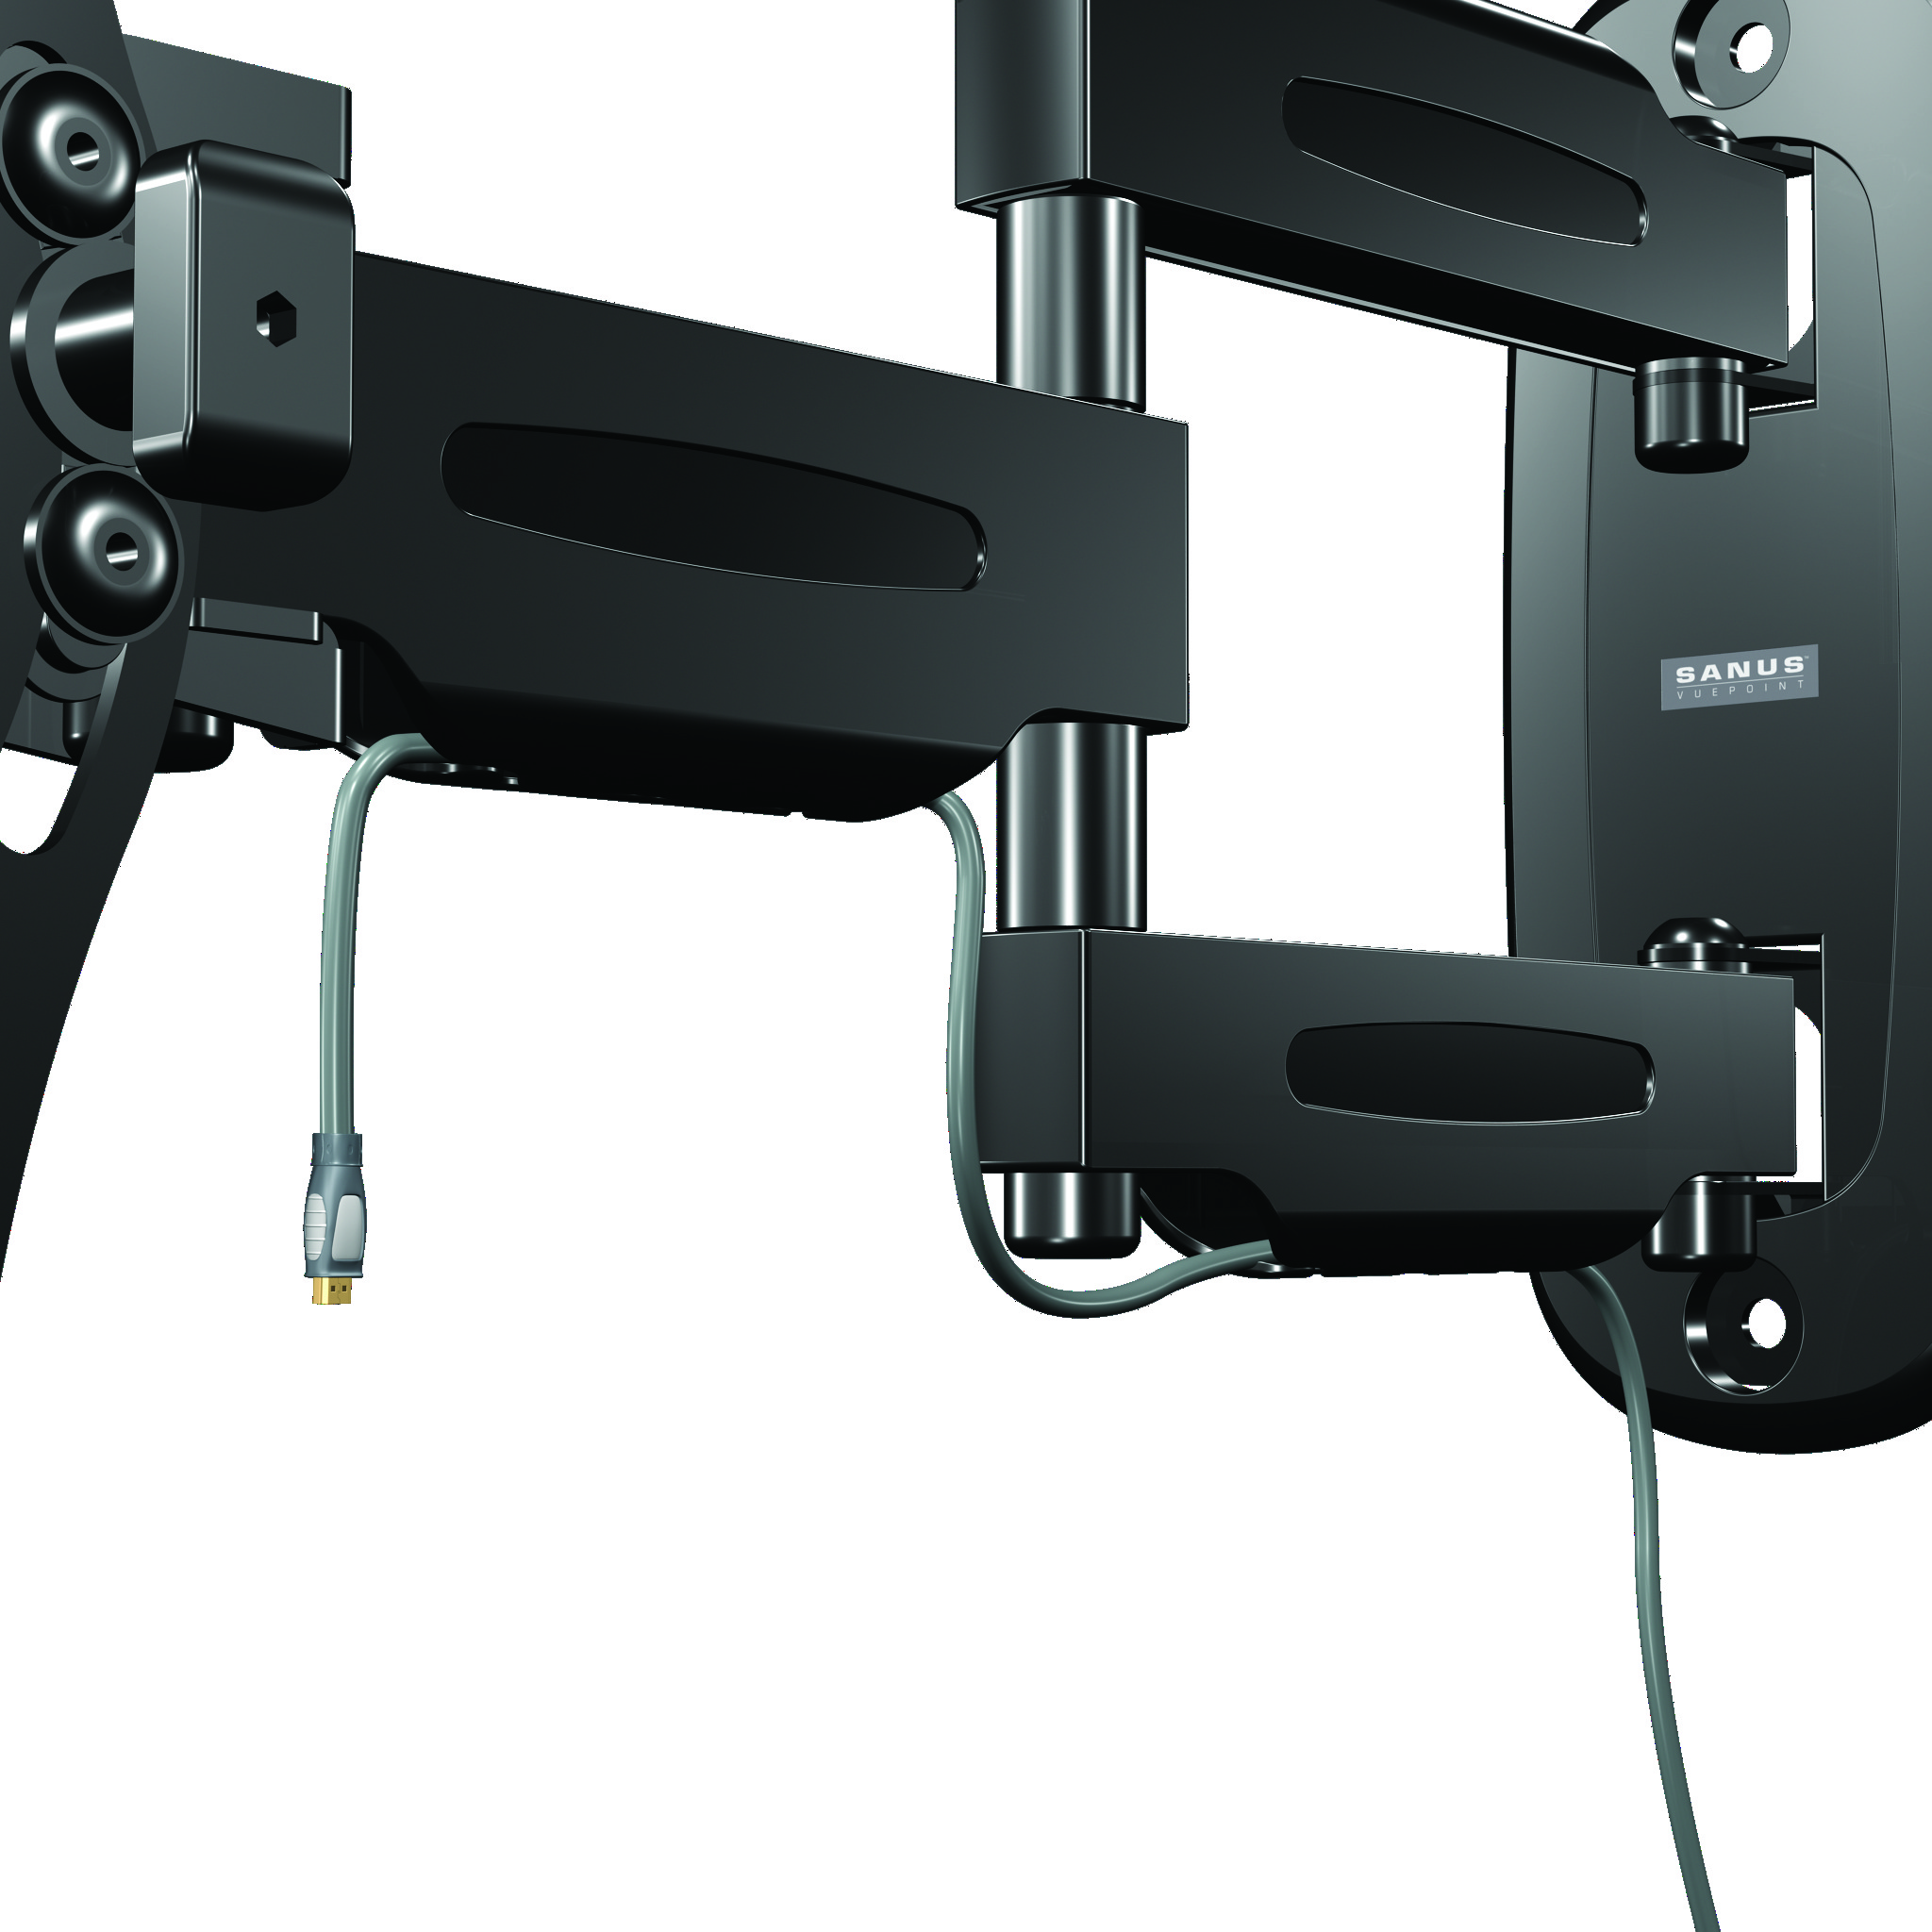 SANUS Full-Motion TV Mount for 32"-55" w/ cable tunnels & 10' HDMI - image 5 of 7